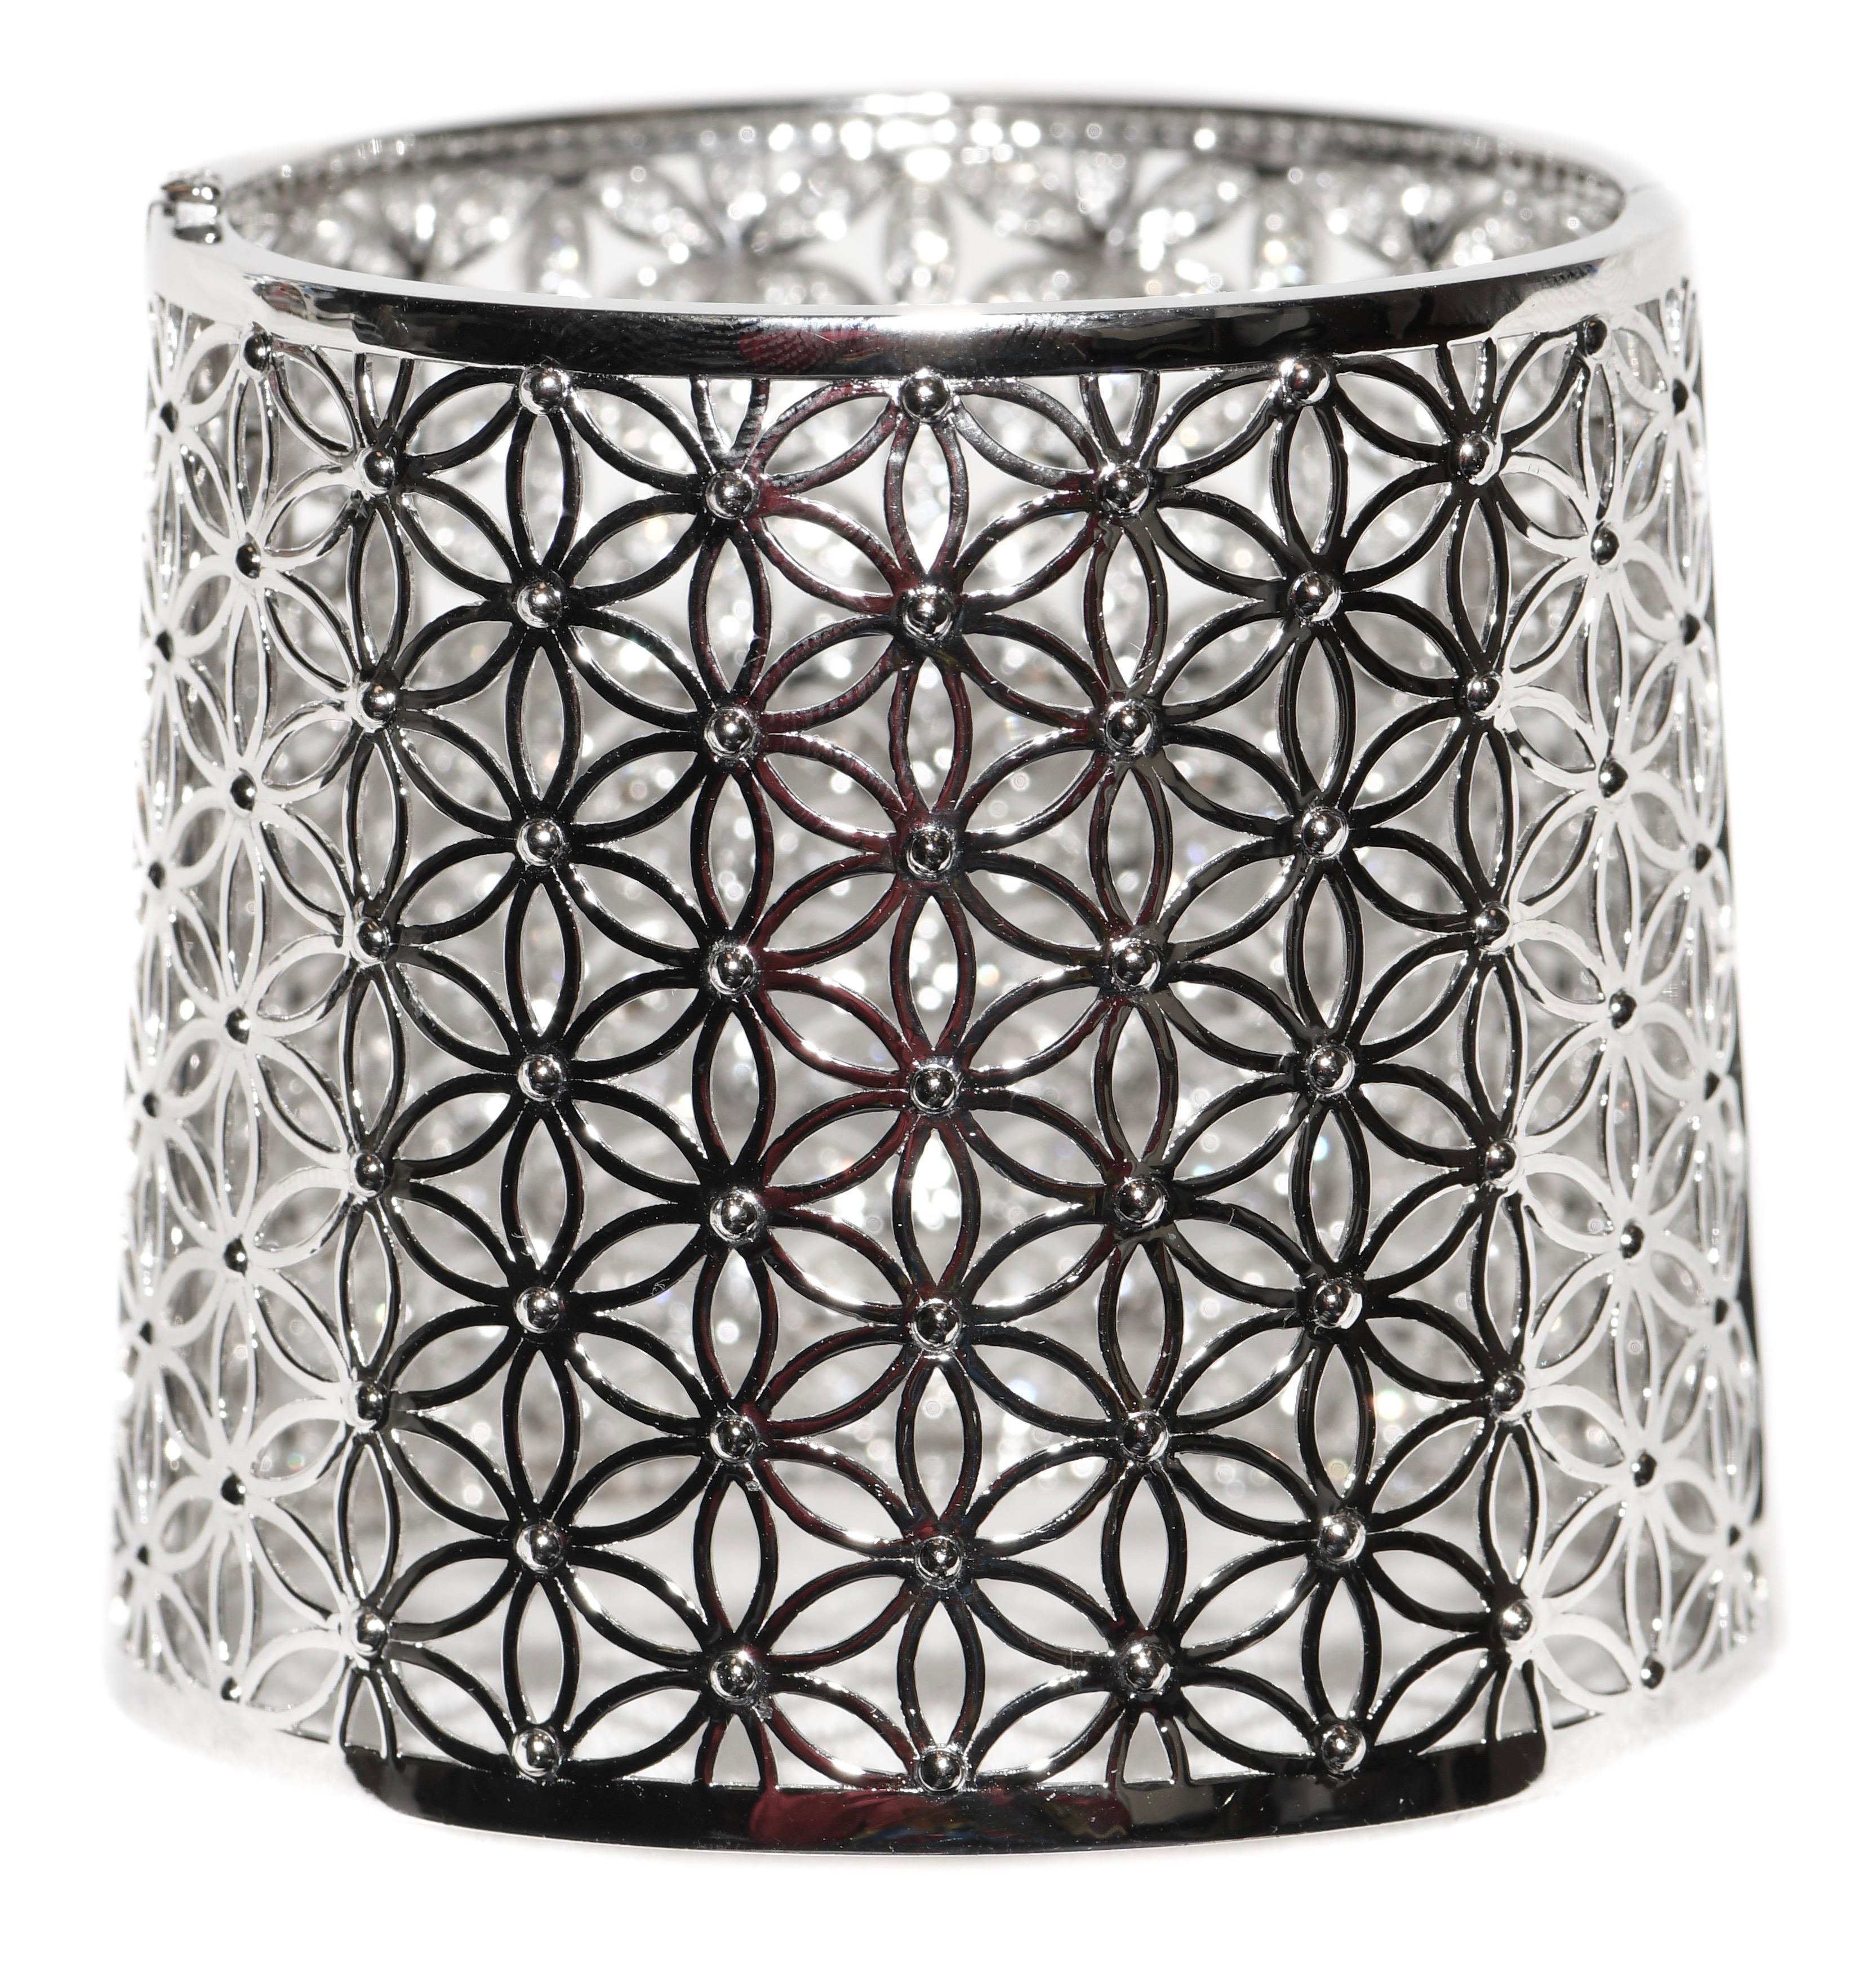 A unique tapered, hinged cuff bracelet exploding with white flower diamonds!  The design genius allows for narrower end to hit the wrist with wider end up farther up the arm for a wonderful fit!  Cuff measures 2.25